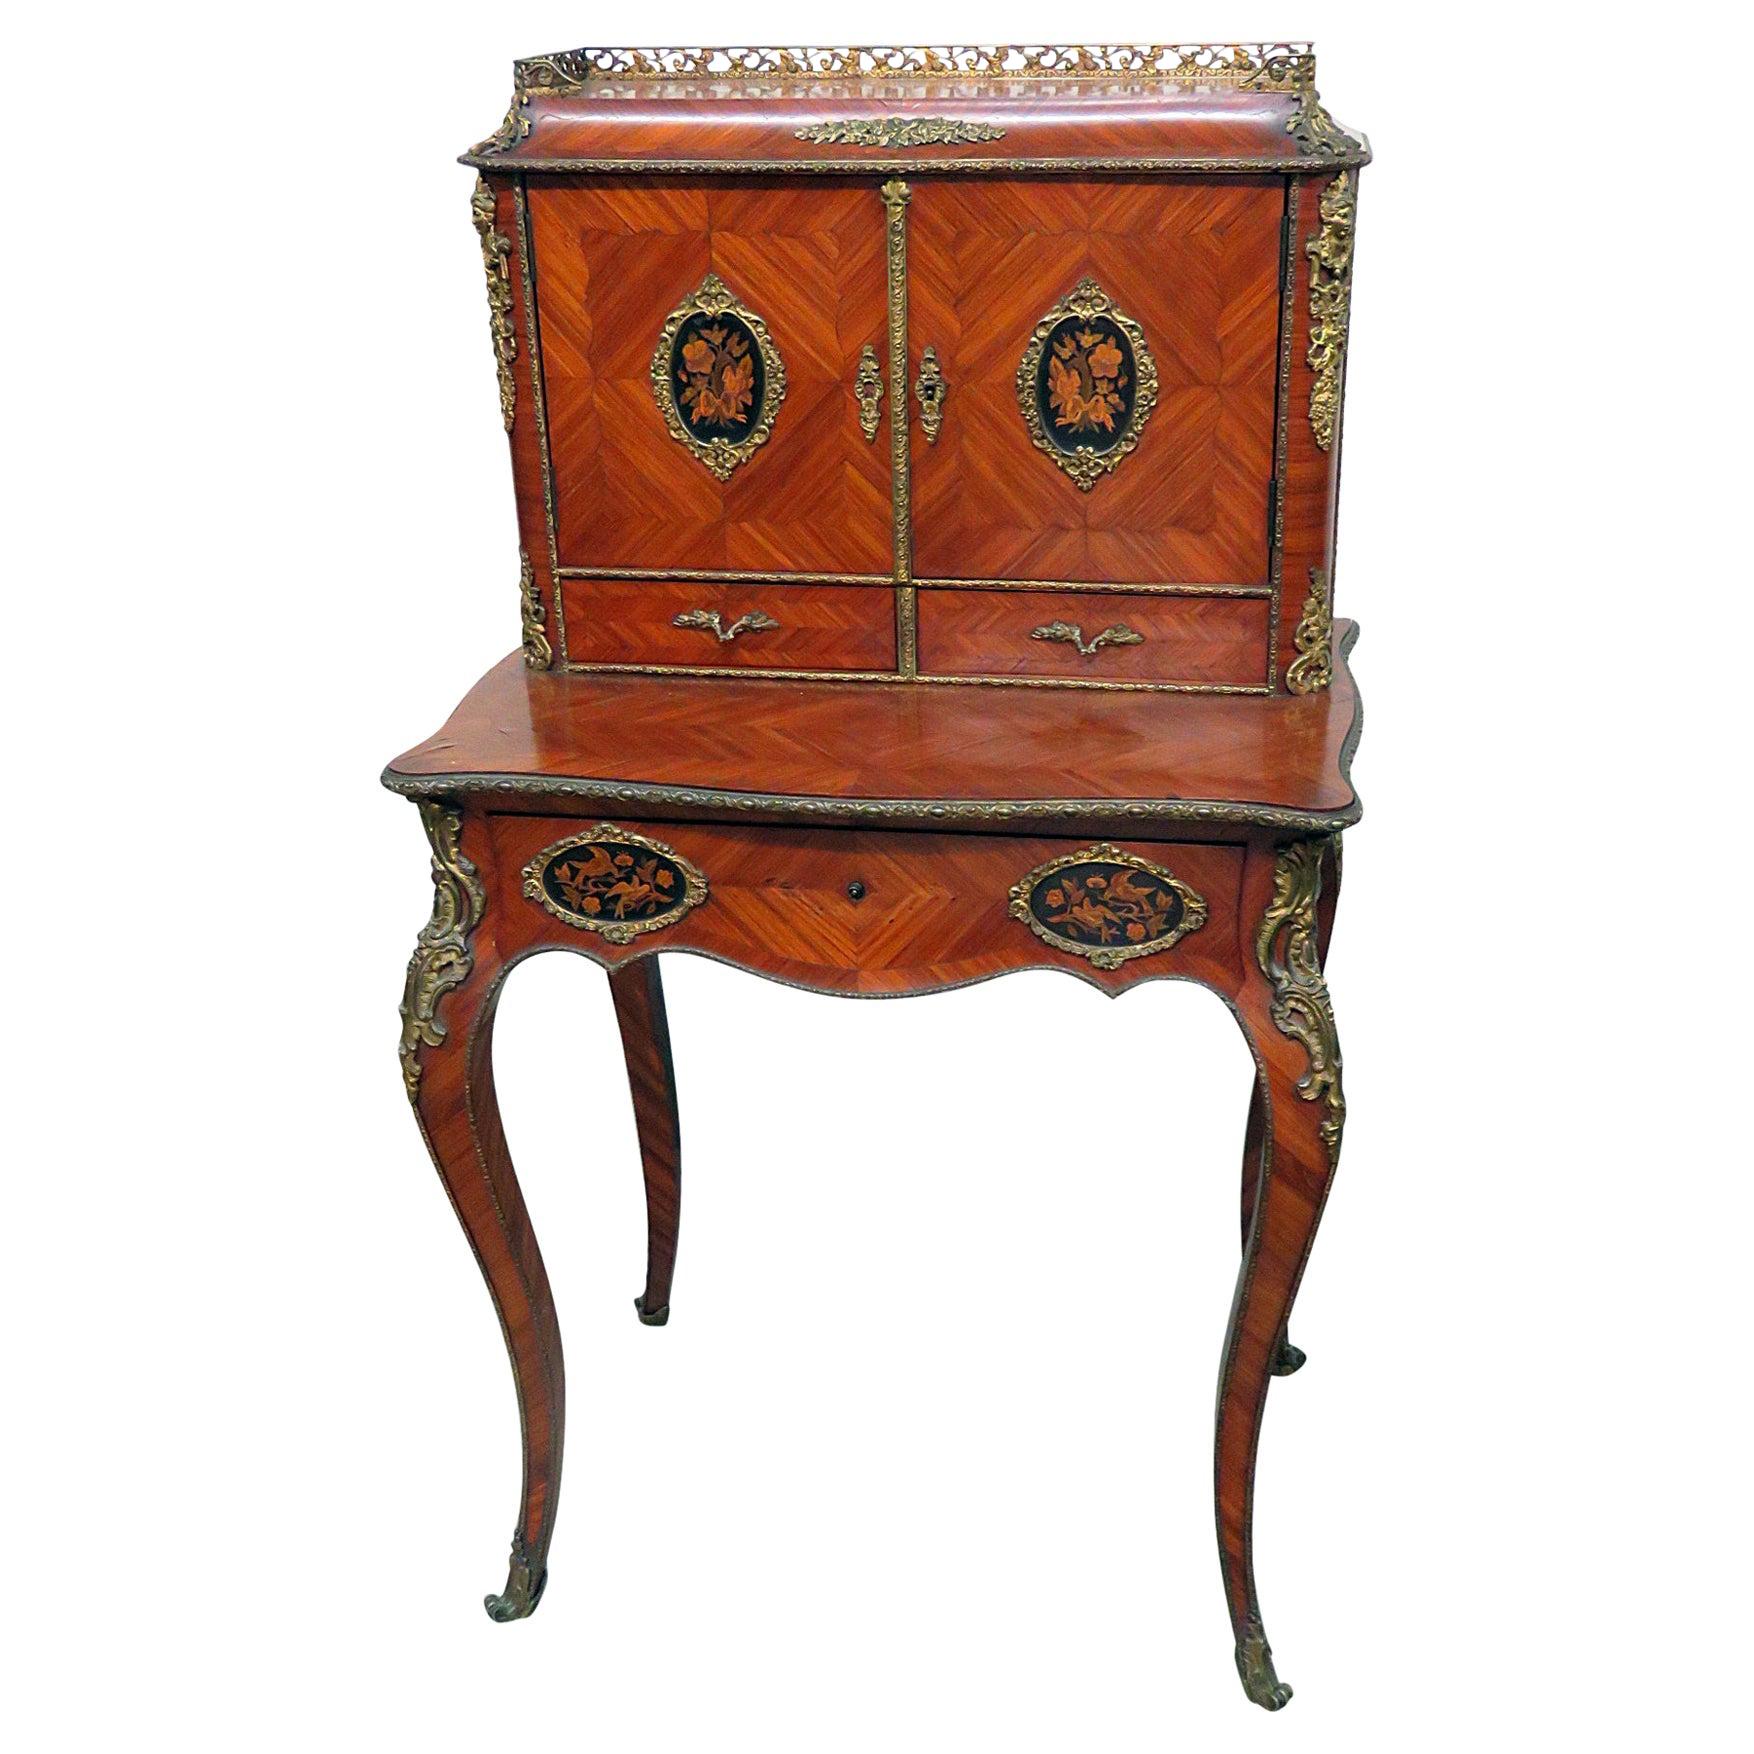 Antique C1870s French Louis XVI Style Inlaid King Wood Ladies Writing Desk For Sale